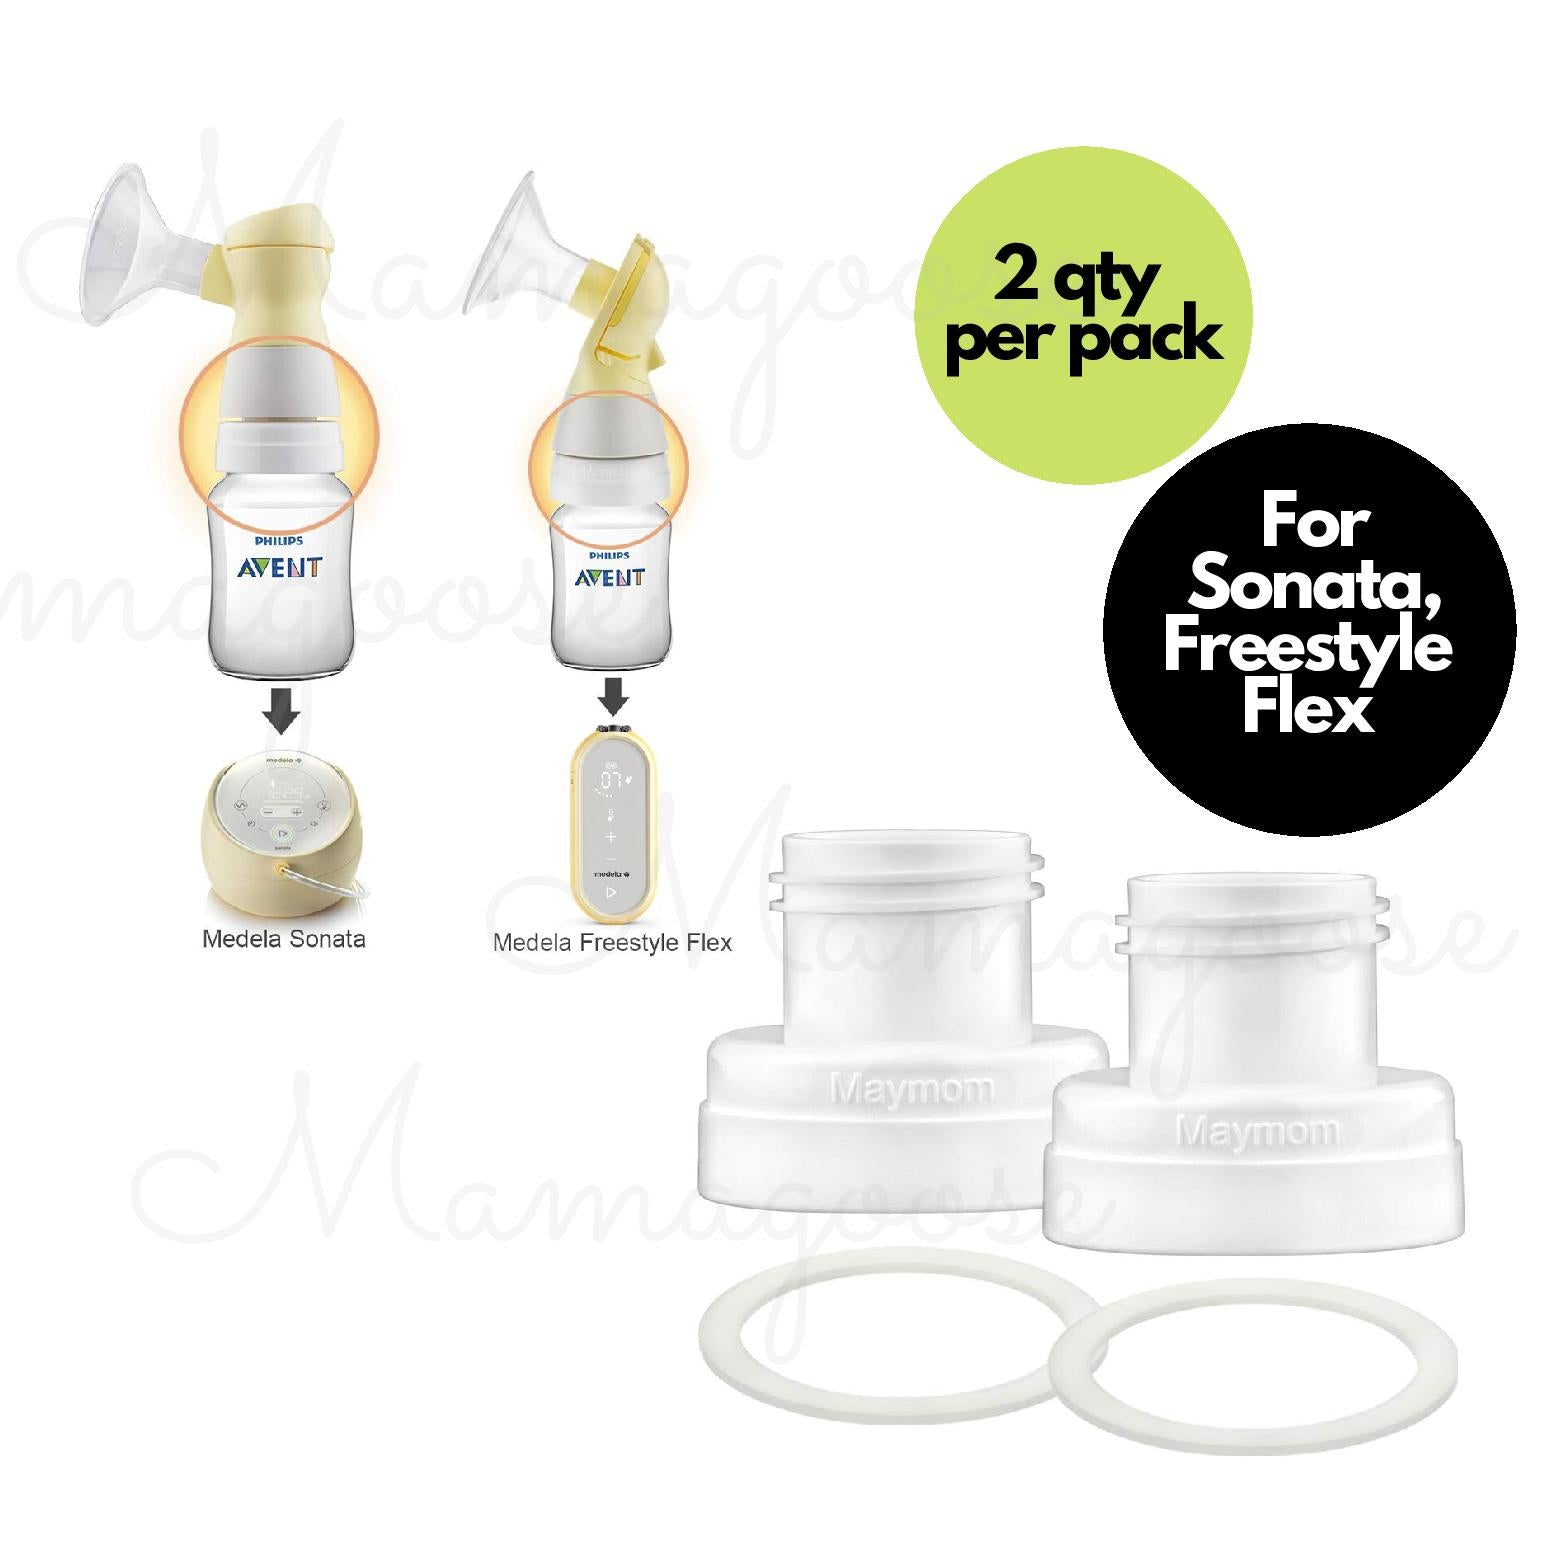 Personalfit Flex Double Pumping Kit for Pump In Style Maxflow - Medela